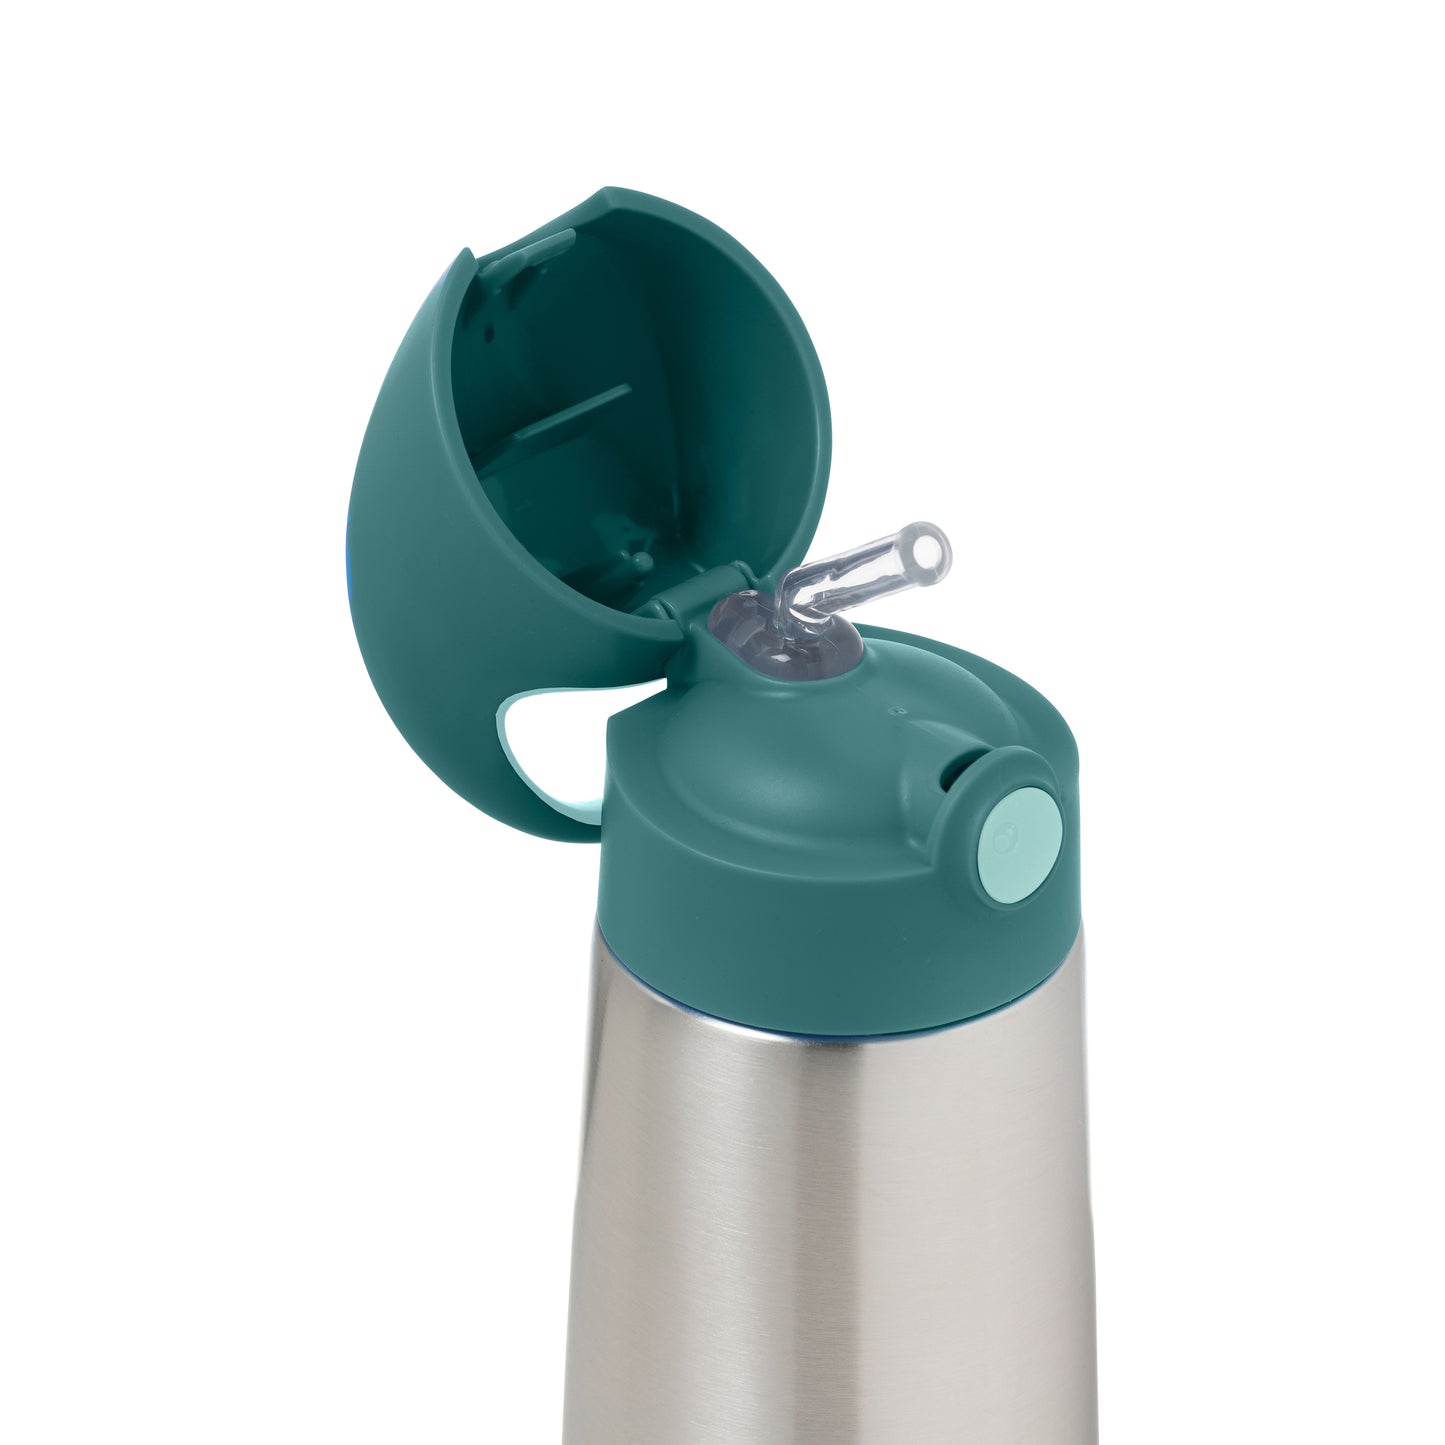 350ml insulated drink bottle - Emerald Forest